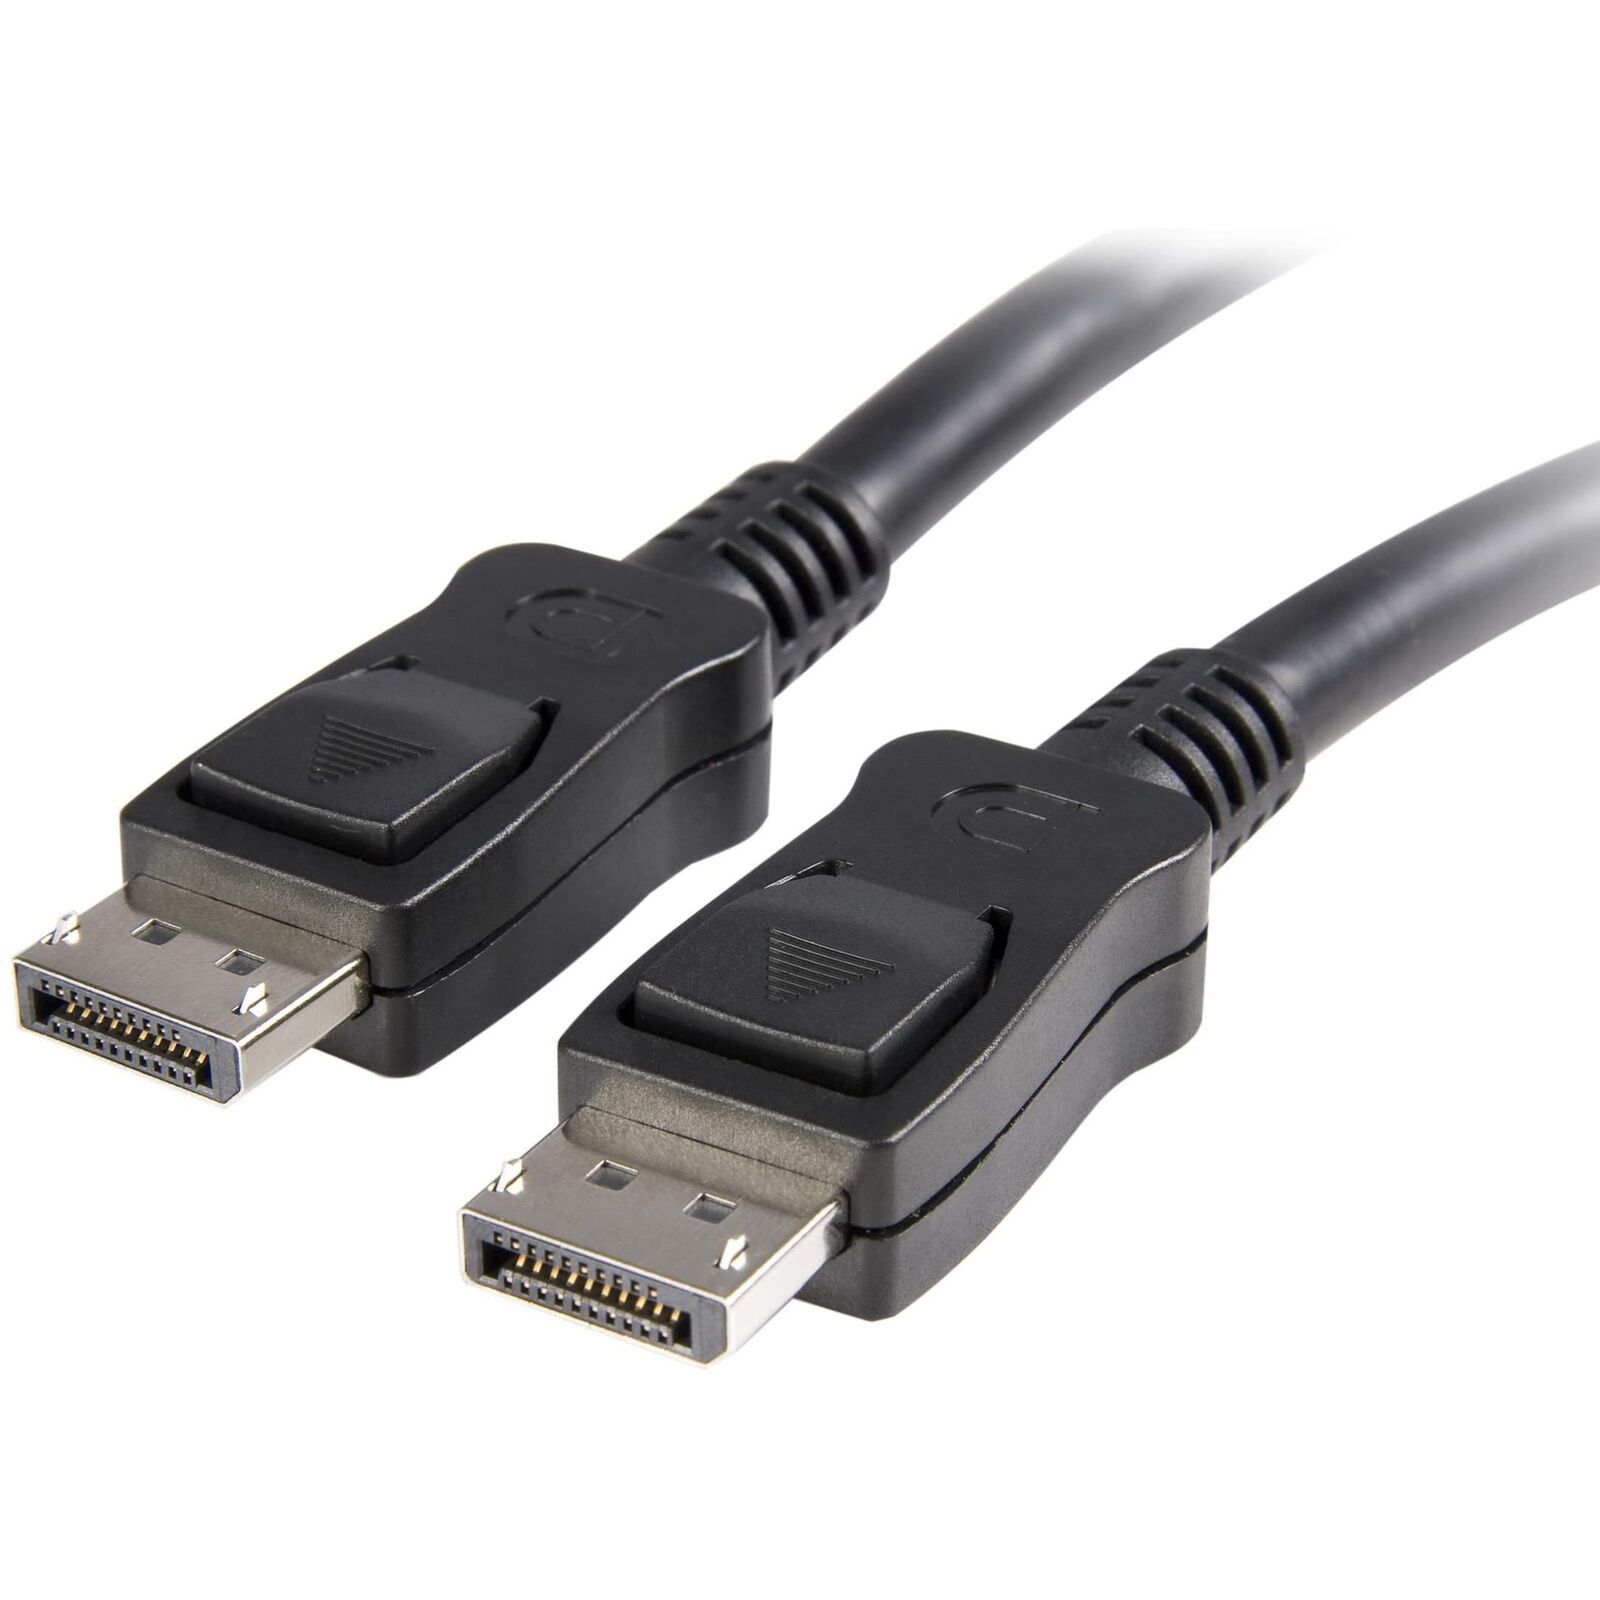 StarTech.com DISPLPORT15L DisplayPort Cable - 15 ft. - with Latches - 4K